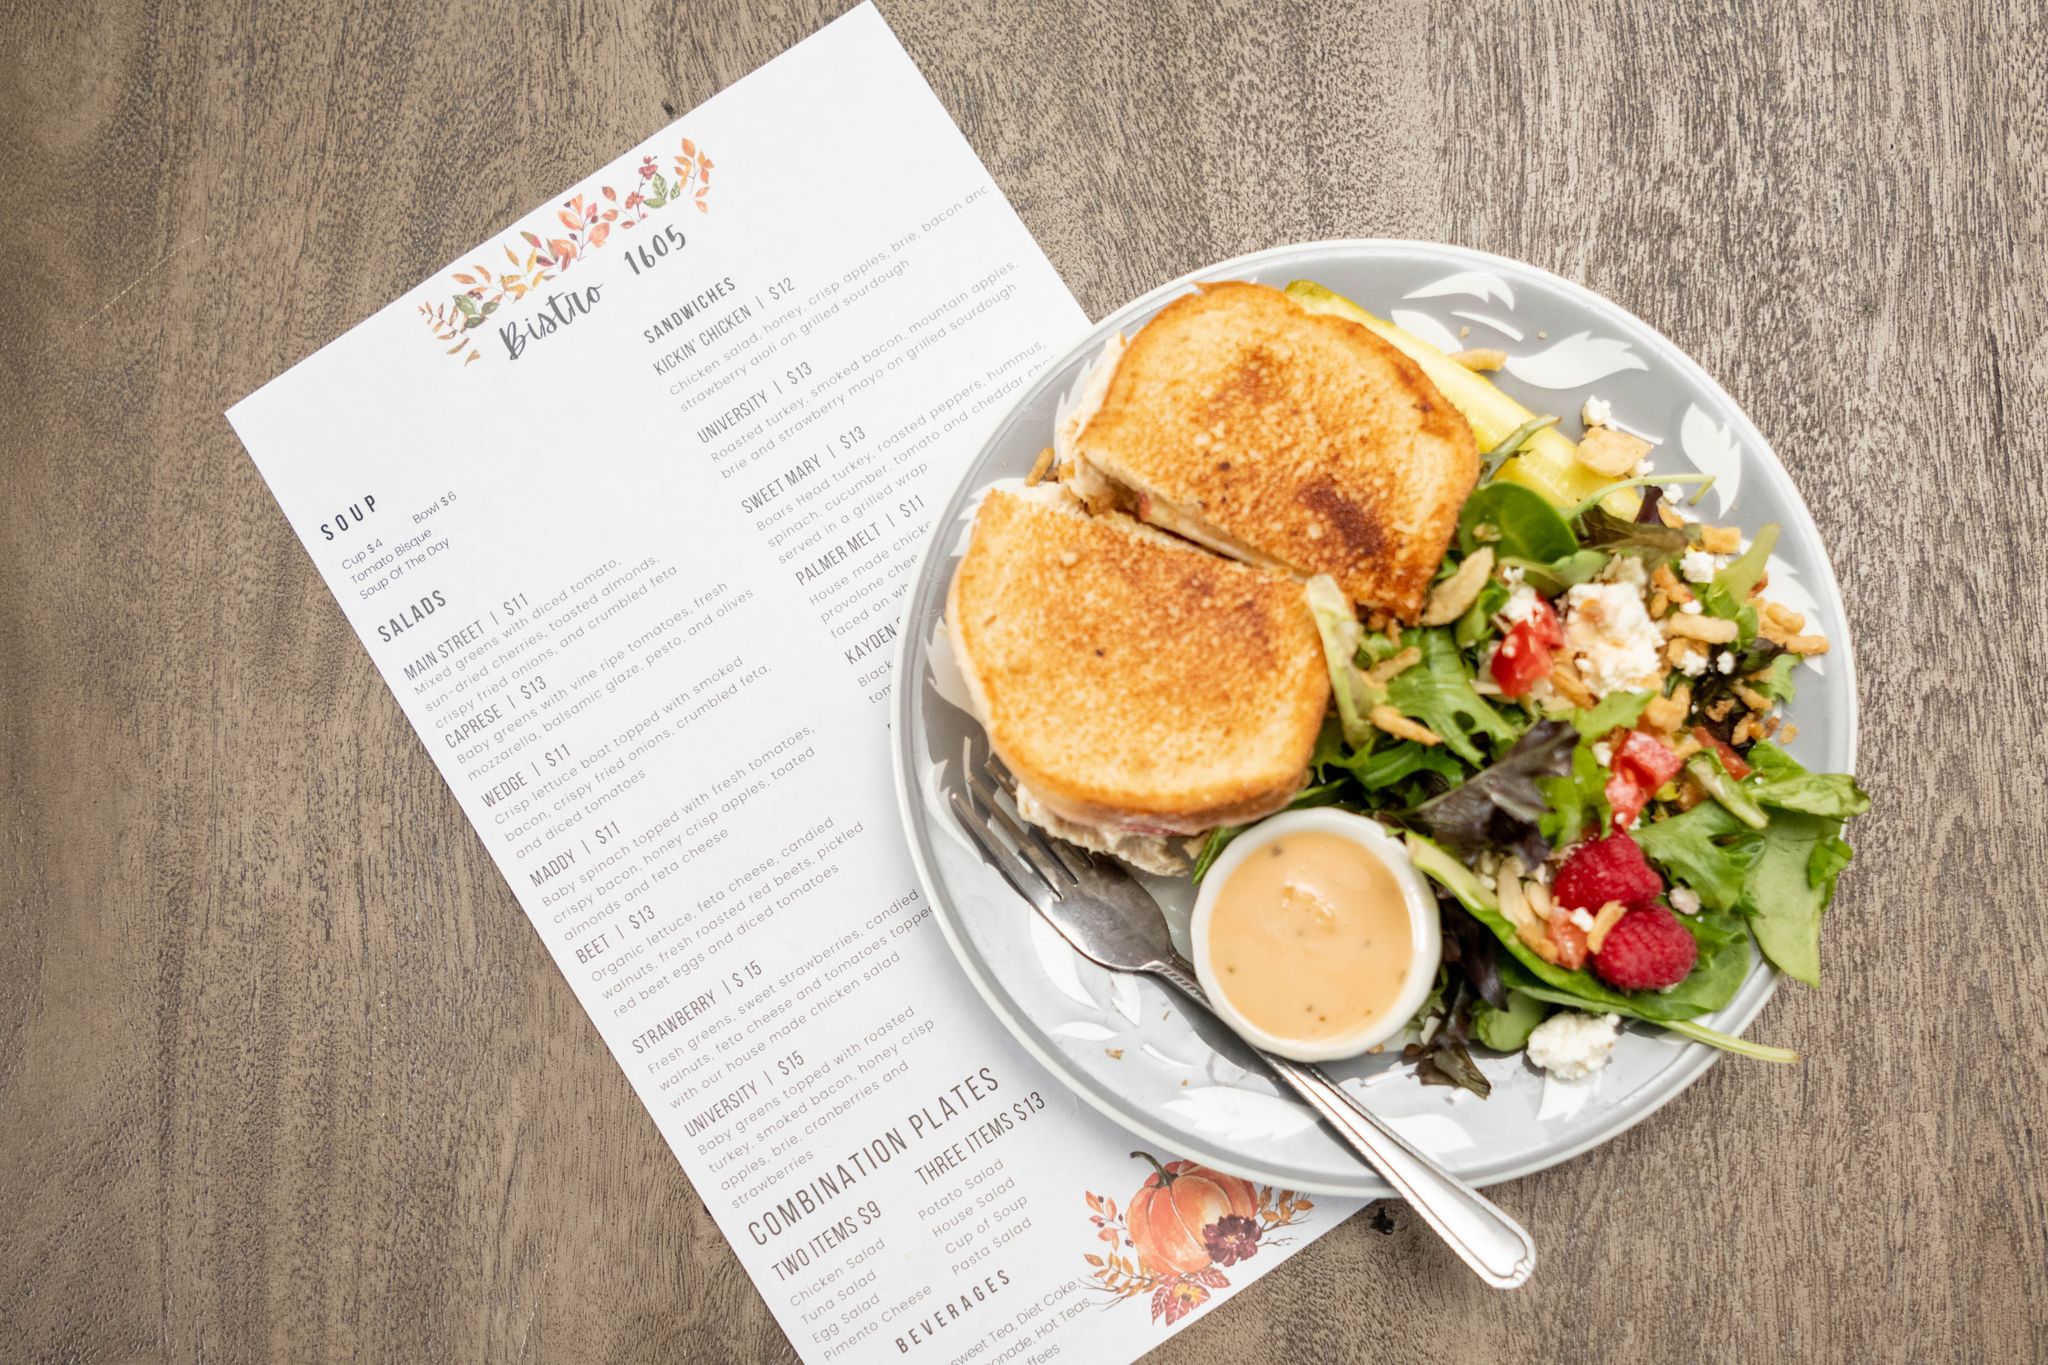 A menu from Bistro 1605 lays on a table with a sandwich and salad from a restaurant where to eat in High Point, NC.